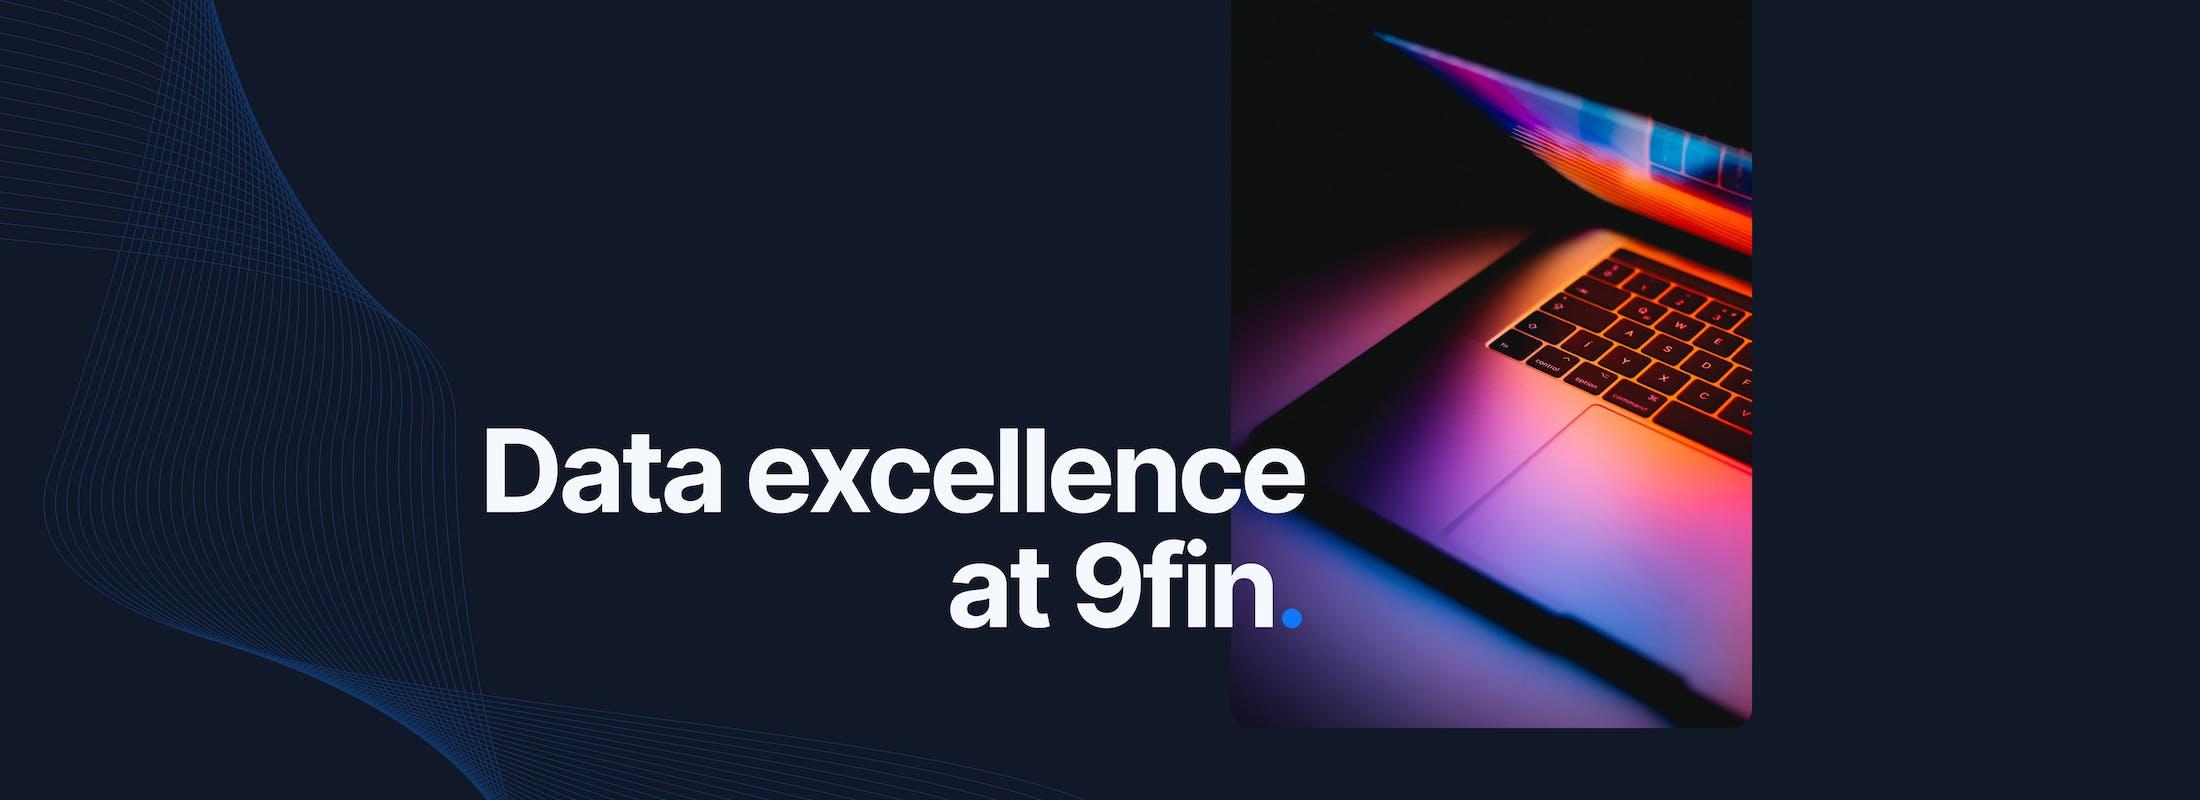 Data excellence at 9fin